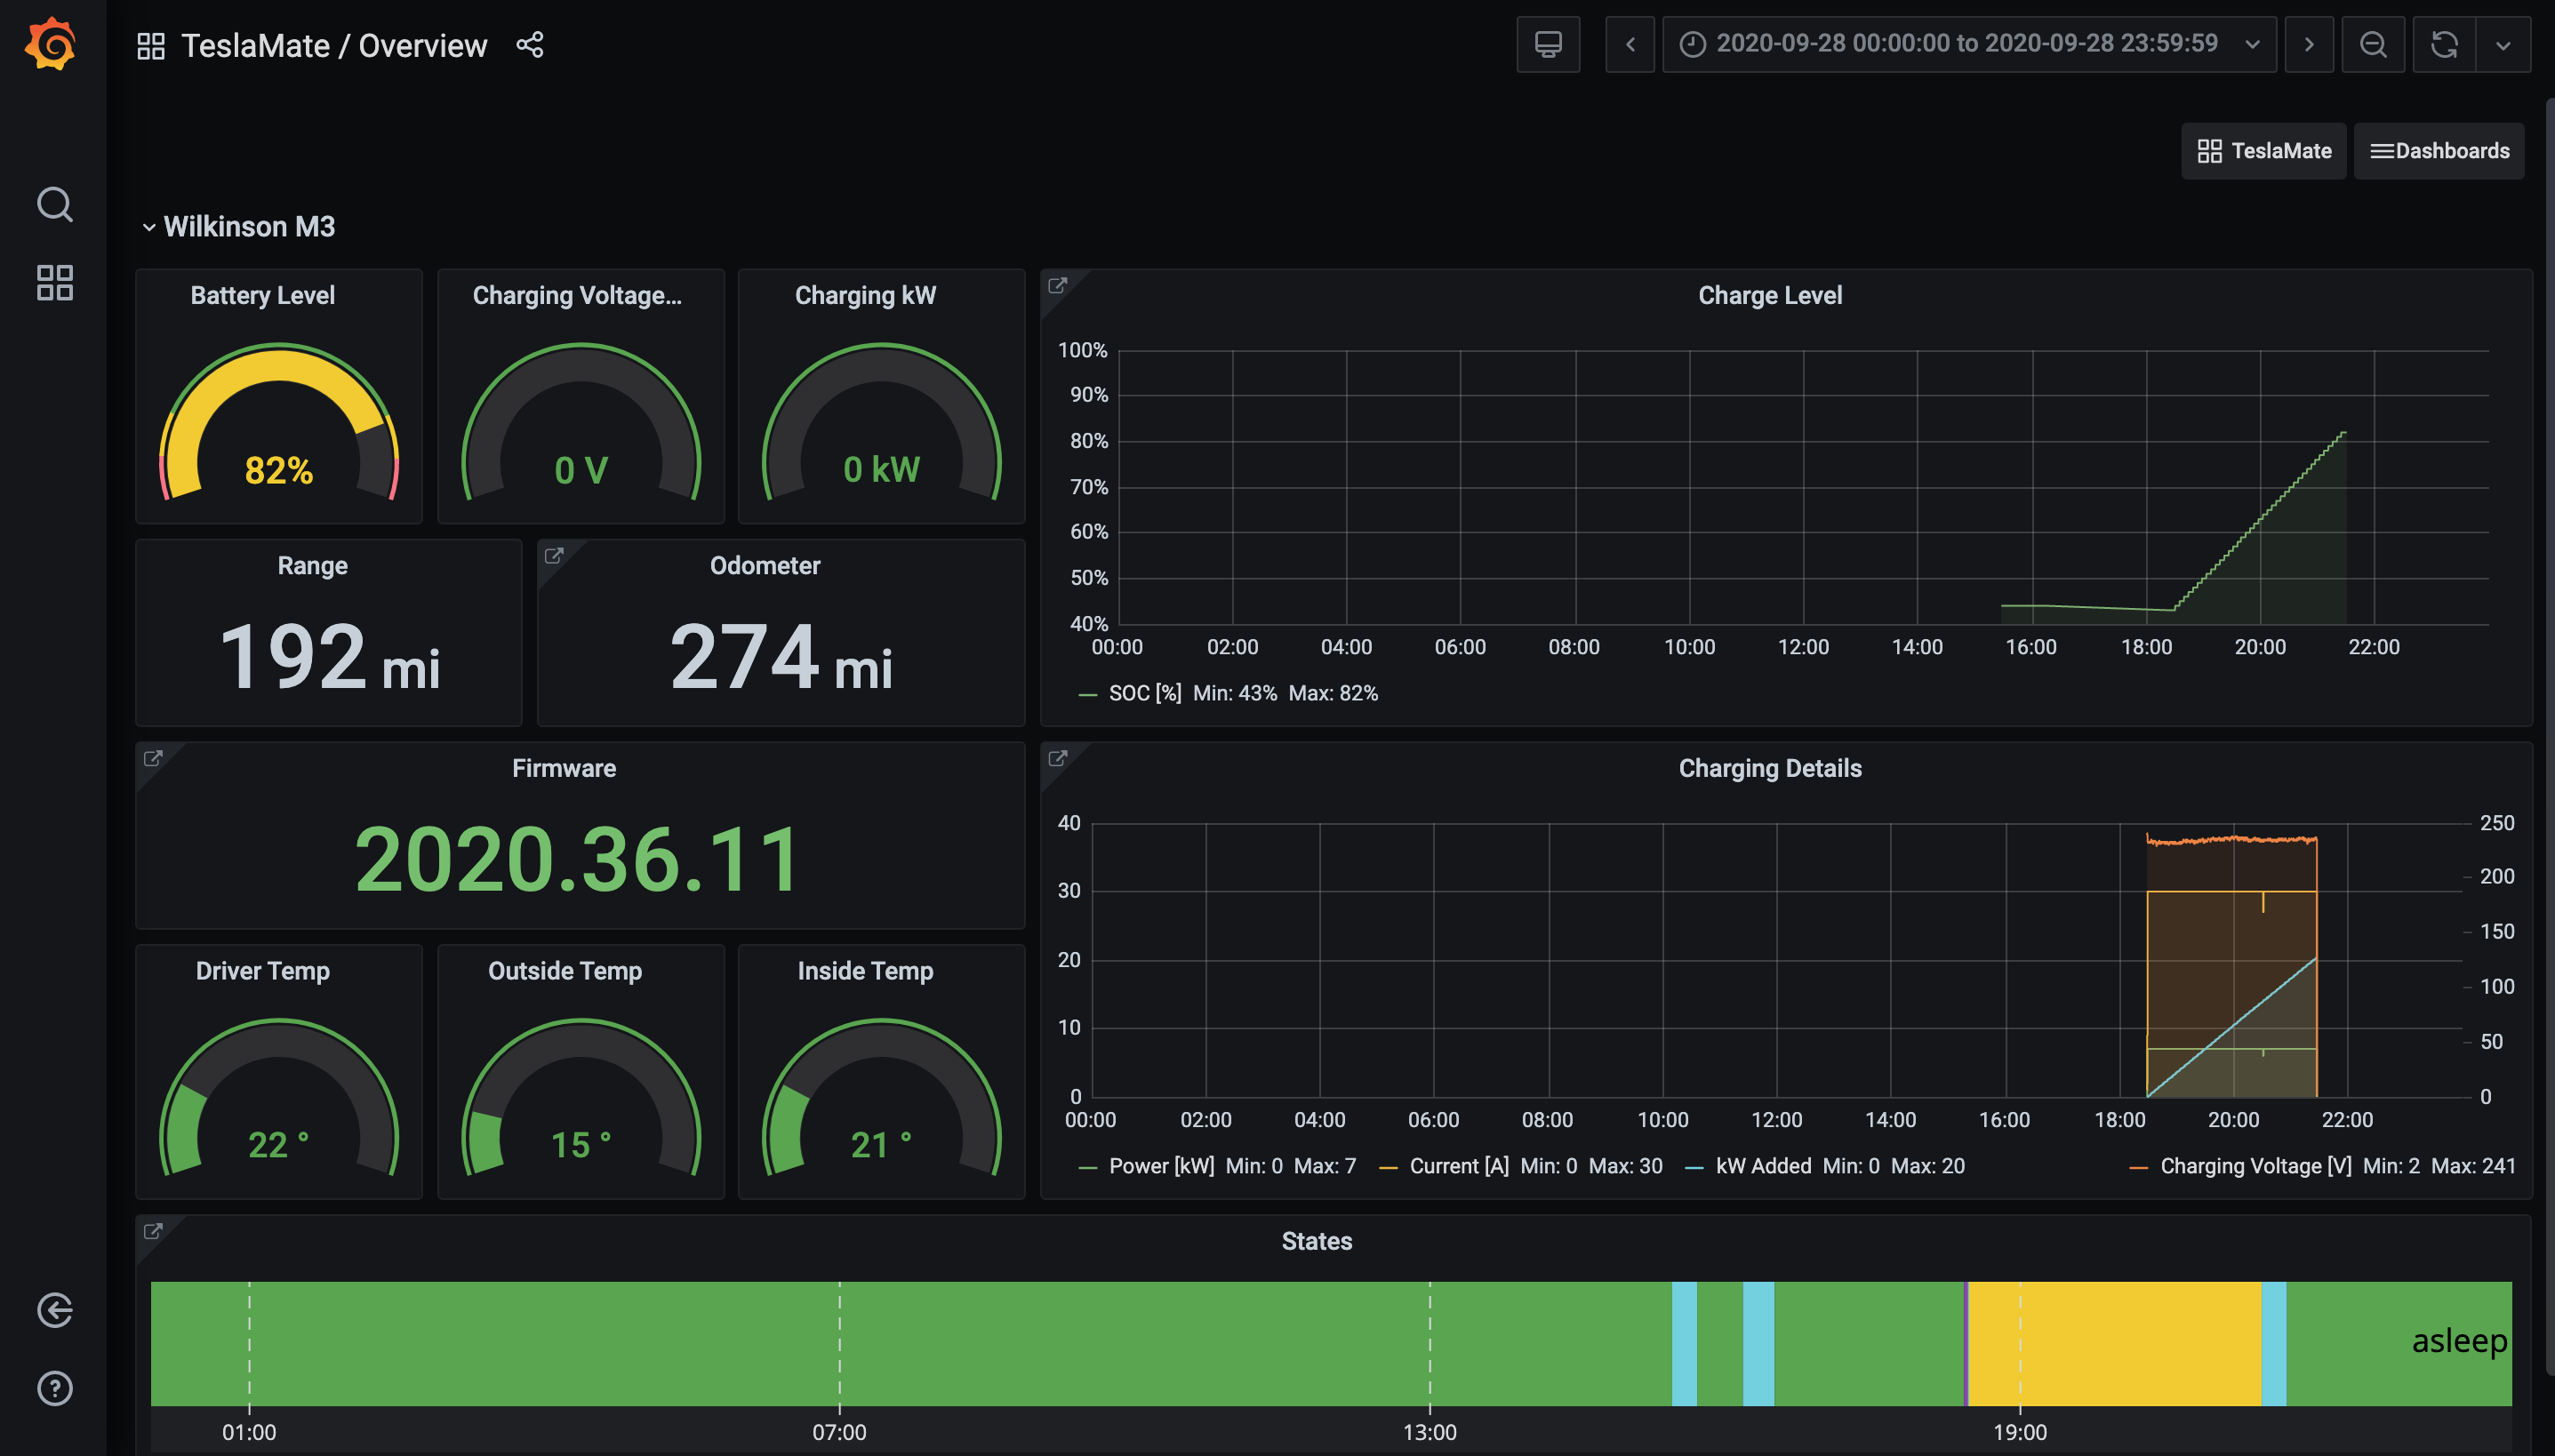 TeslaMate Overview Dashboard